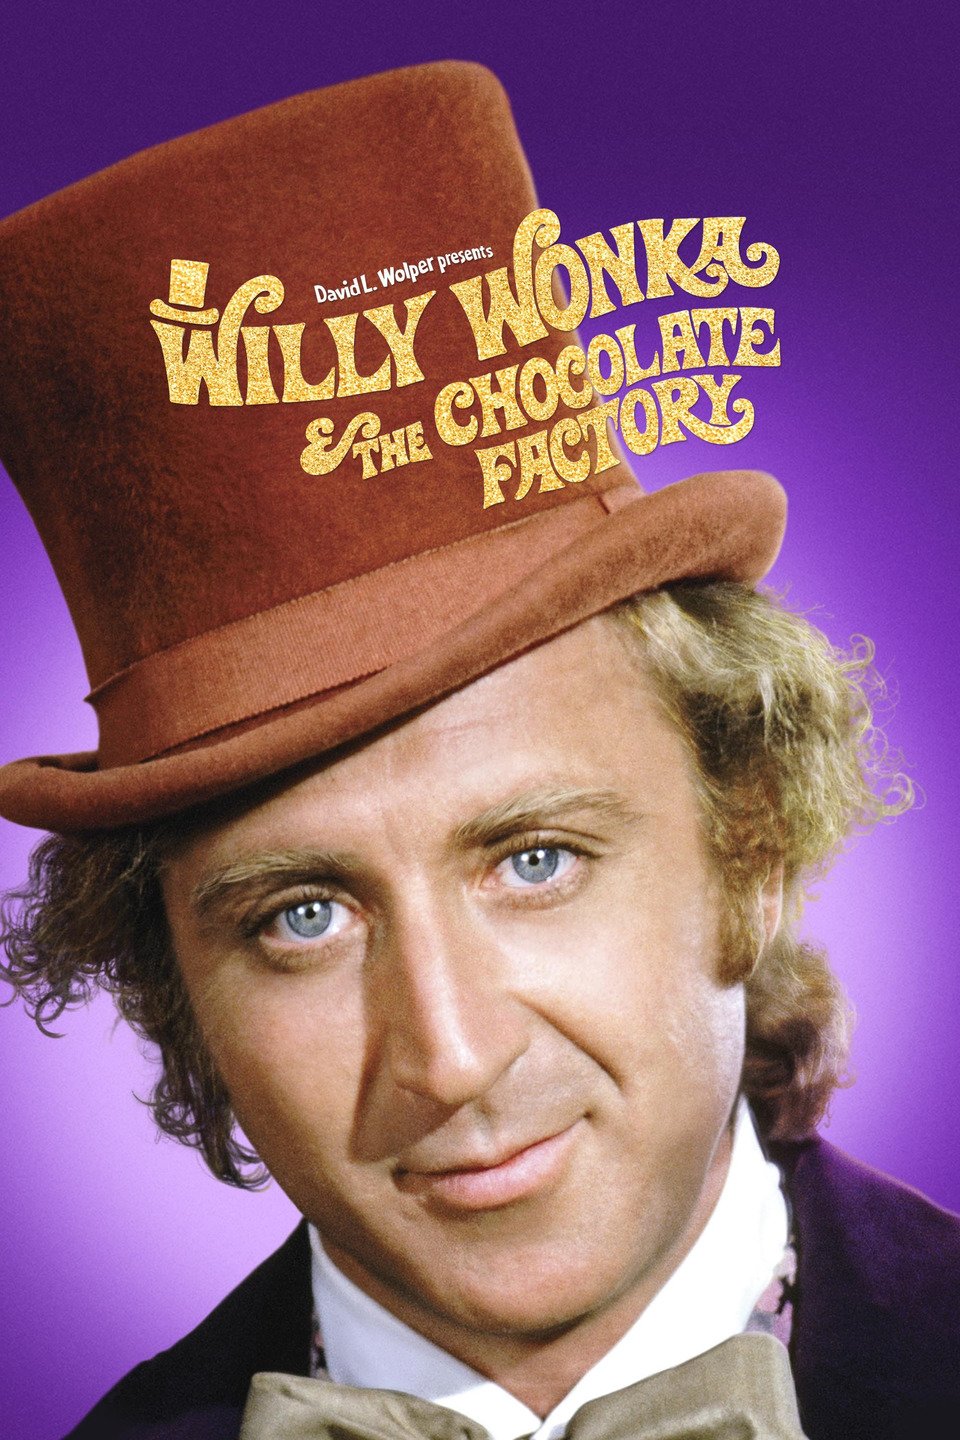 Promo photo for the film Willy Wonka and the Chocolate Factory 